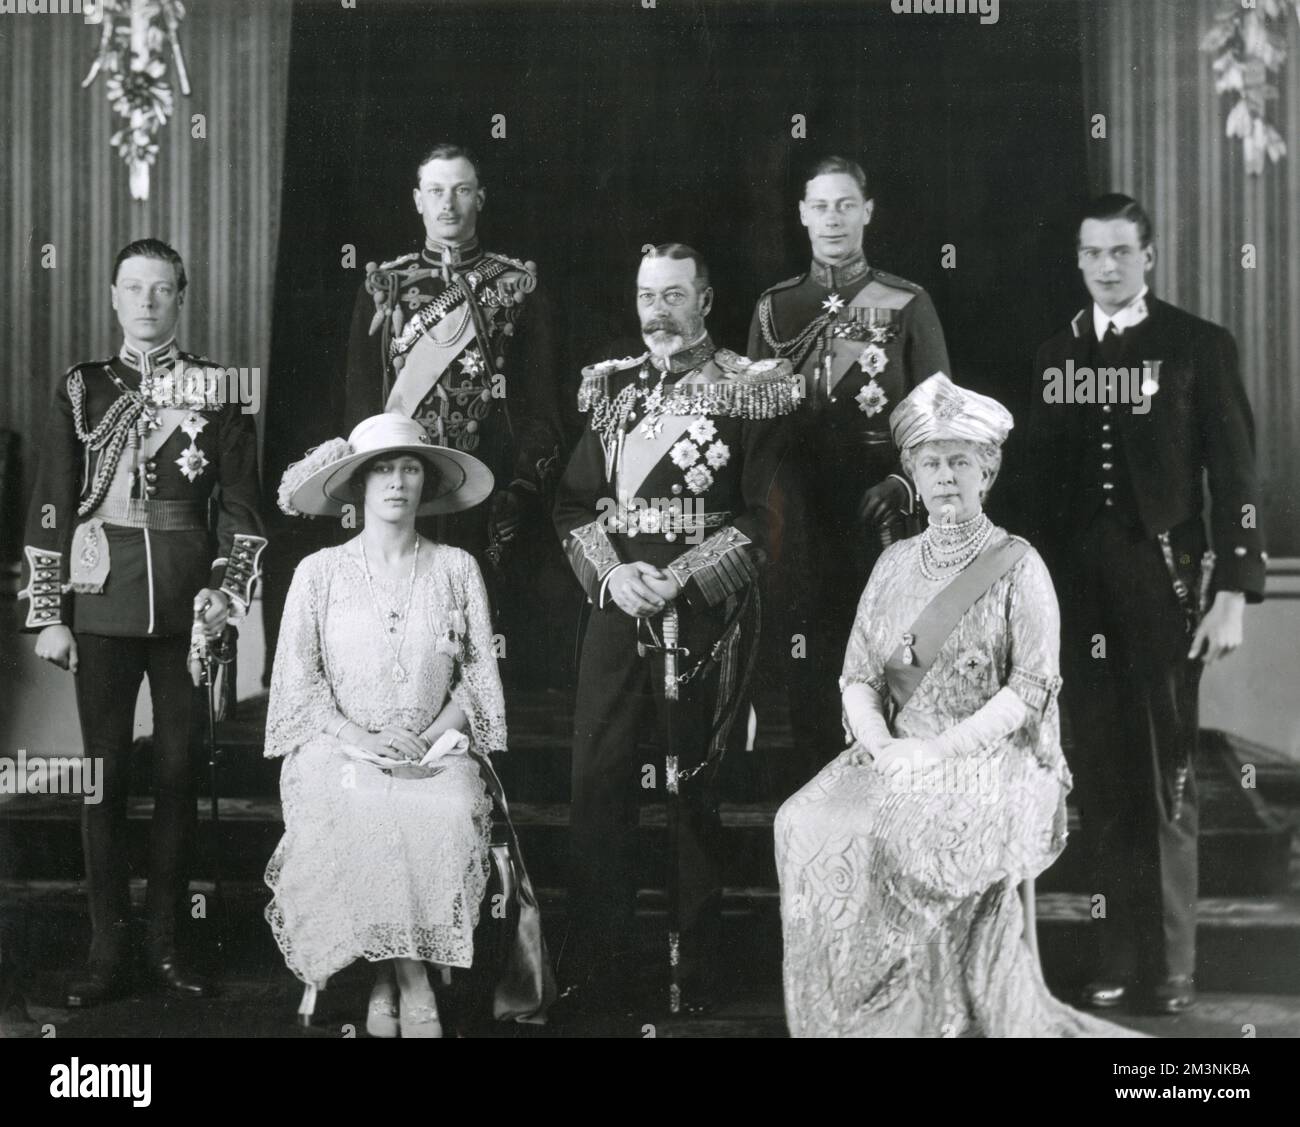 The British Royal Family on the wedding day of the Duke of York (later King George VI). From left to right: Prince Edward, Prince of Wales (later King Edward VIII, then Duke of Windsor after abdication); Princess Mary (Viscountess Lascelles, later Princess Royal, and Countess of Harewood); Henry, Duke of Gloucester; King George V; Albert, Duke of York (later King George VI); Queen Mary; George, Duke of Kent.     Date: 1923 Stock Photo